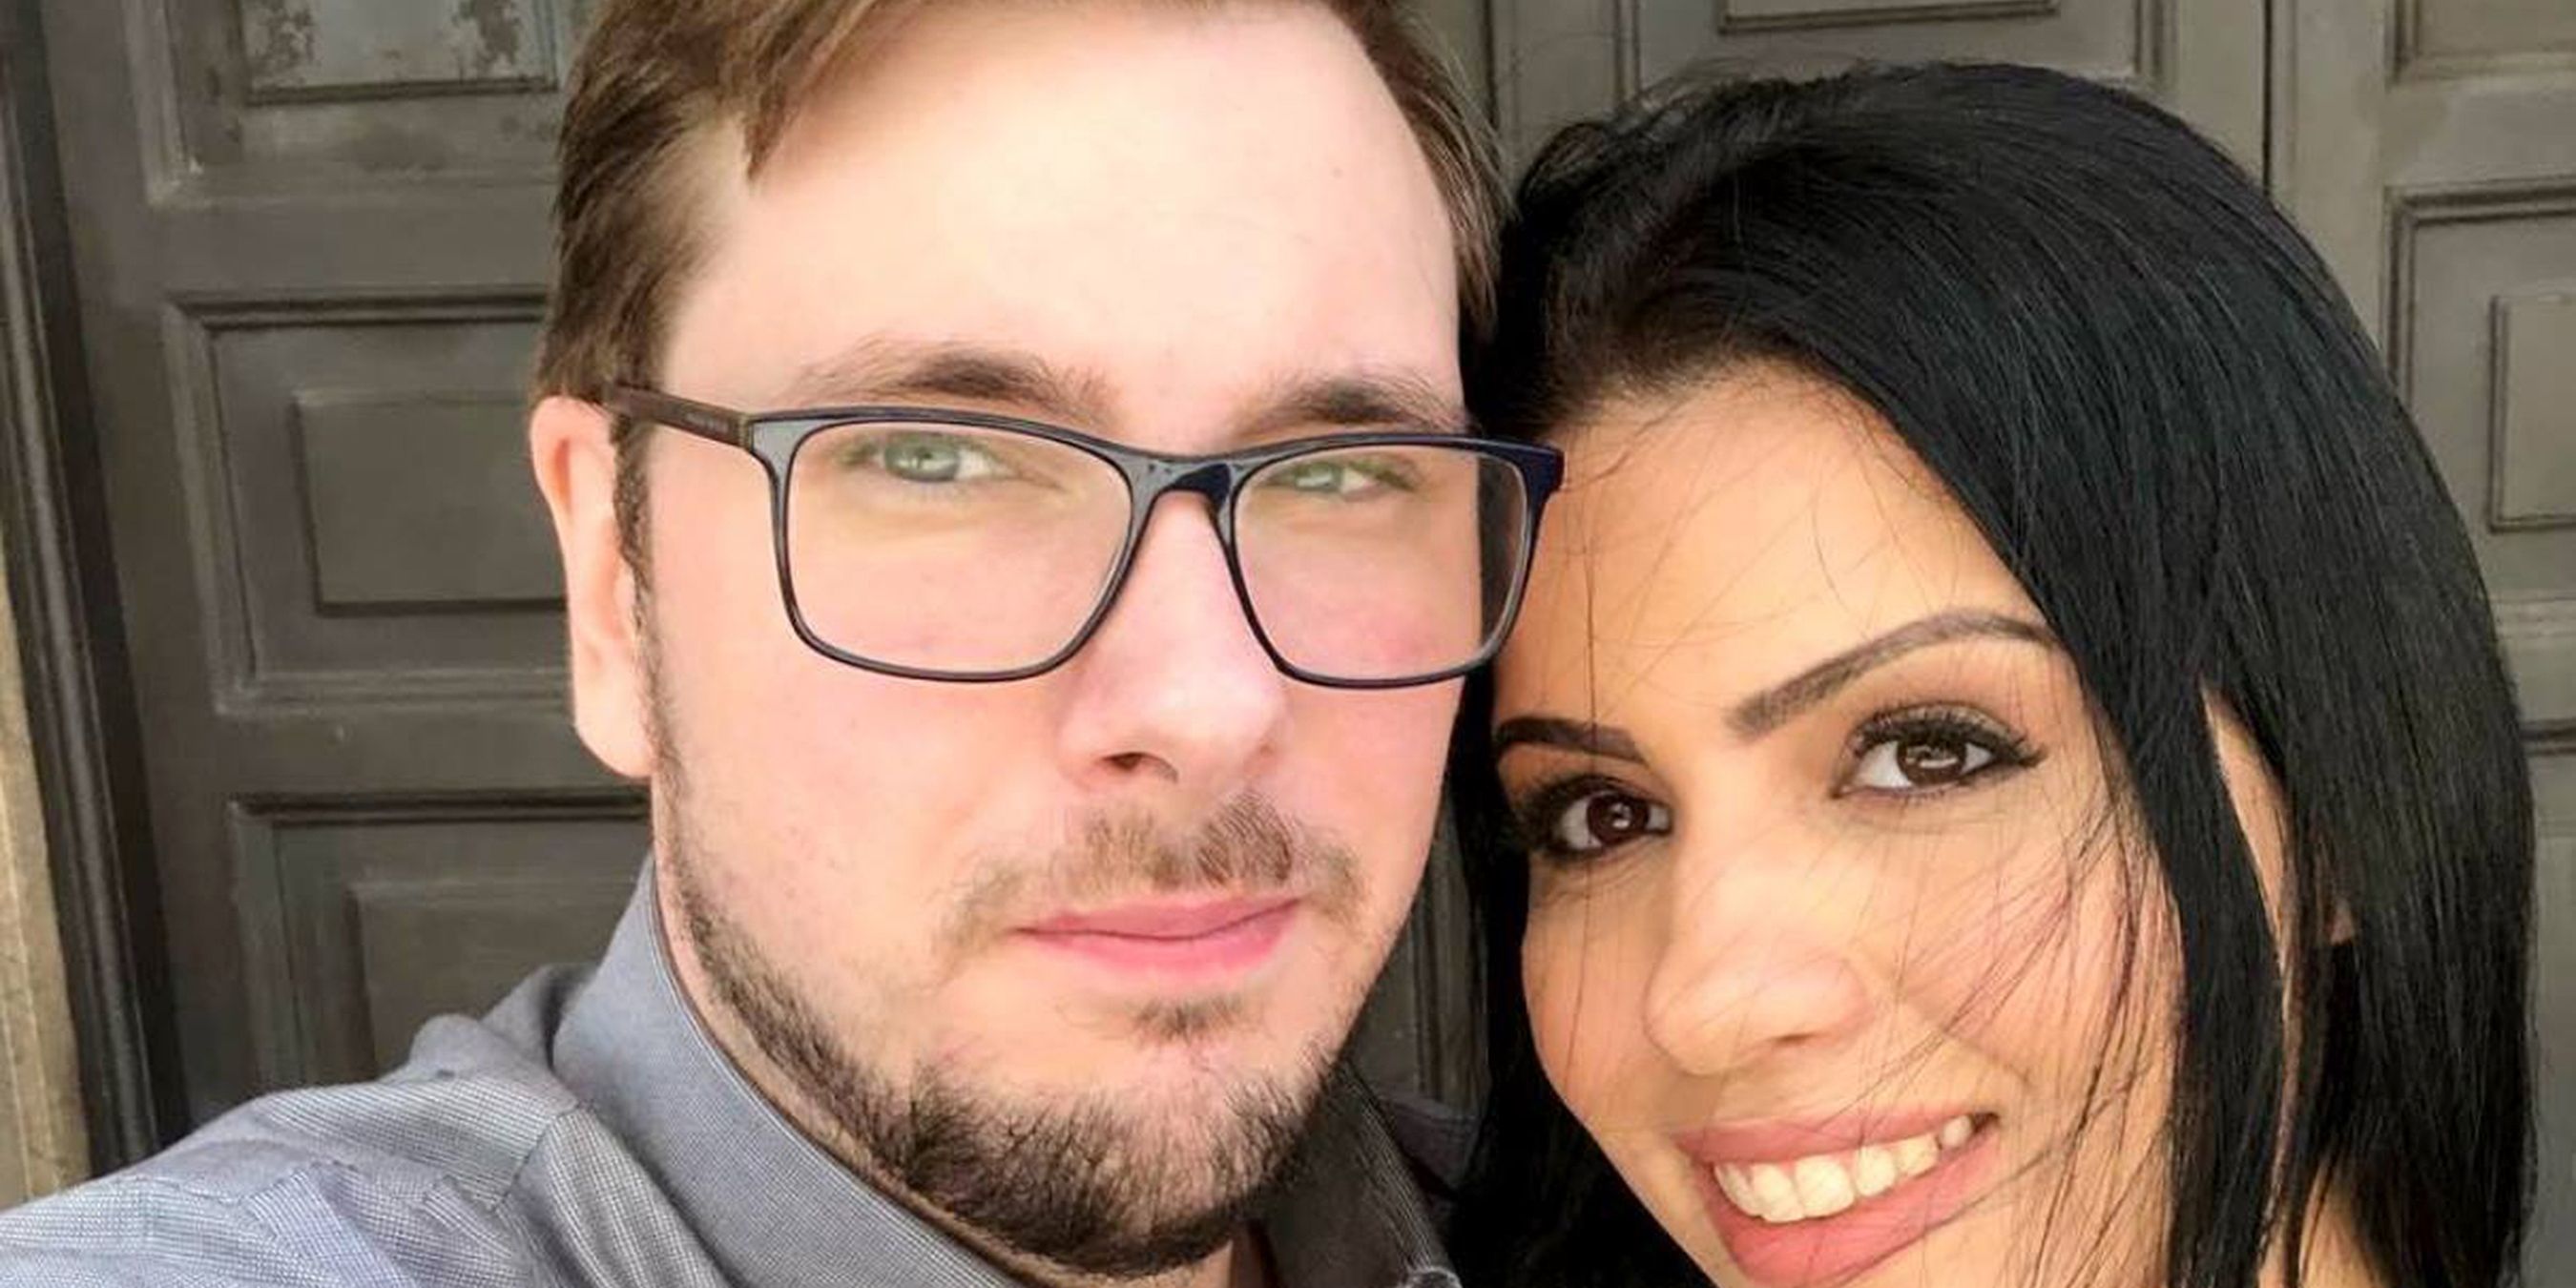 10 BehindTheScenes Facts About 90 Day Fiance Season 6